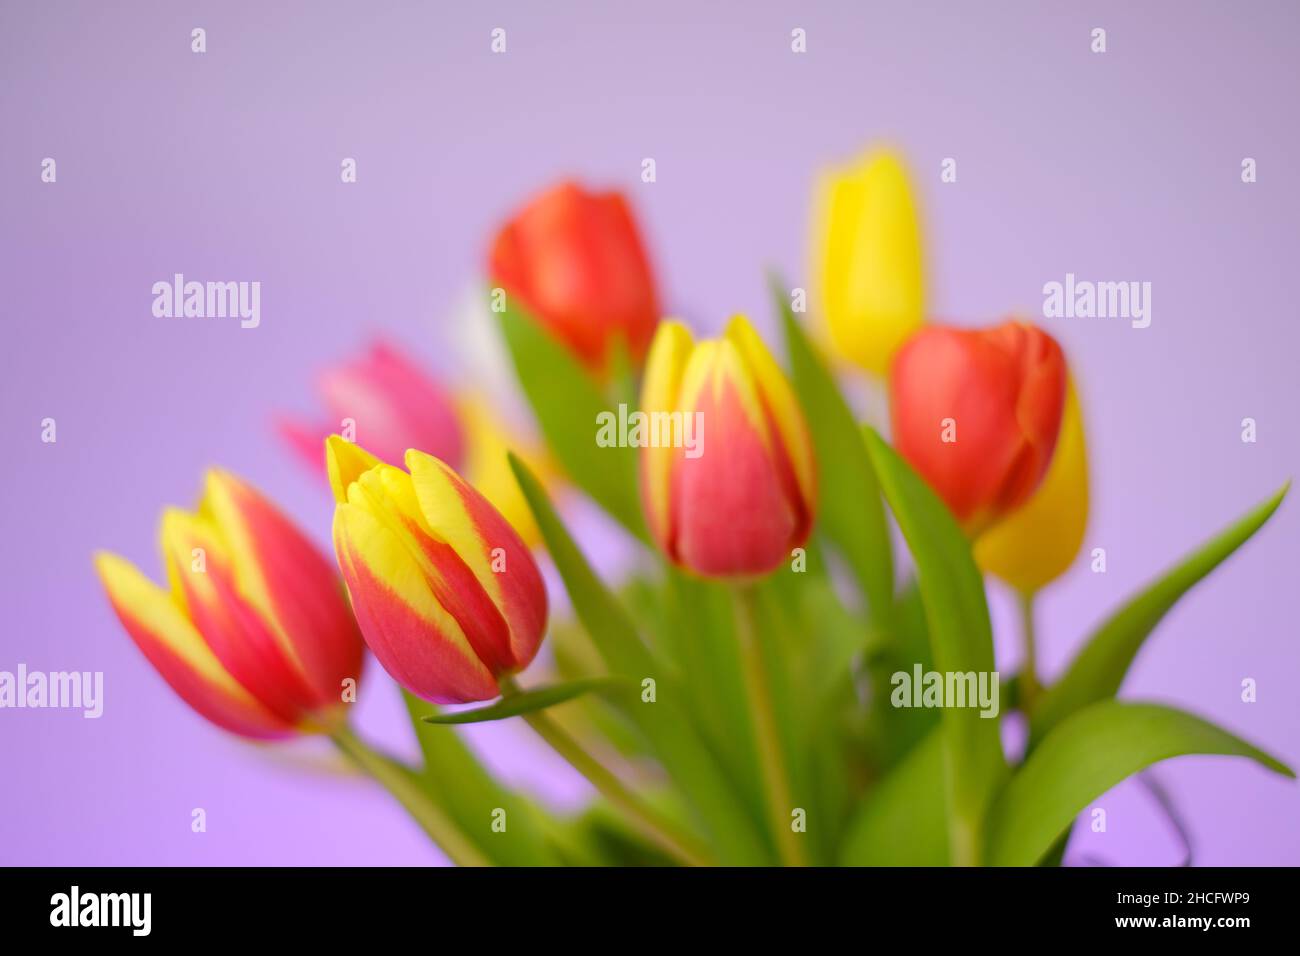 Tulips flowers. Multicolored tulips bouquet on a purple background. Spring tulips flowers bouquet.Floral delicate background Stock Photo